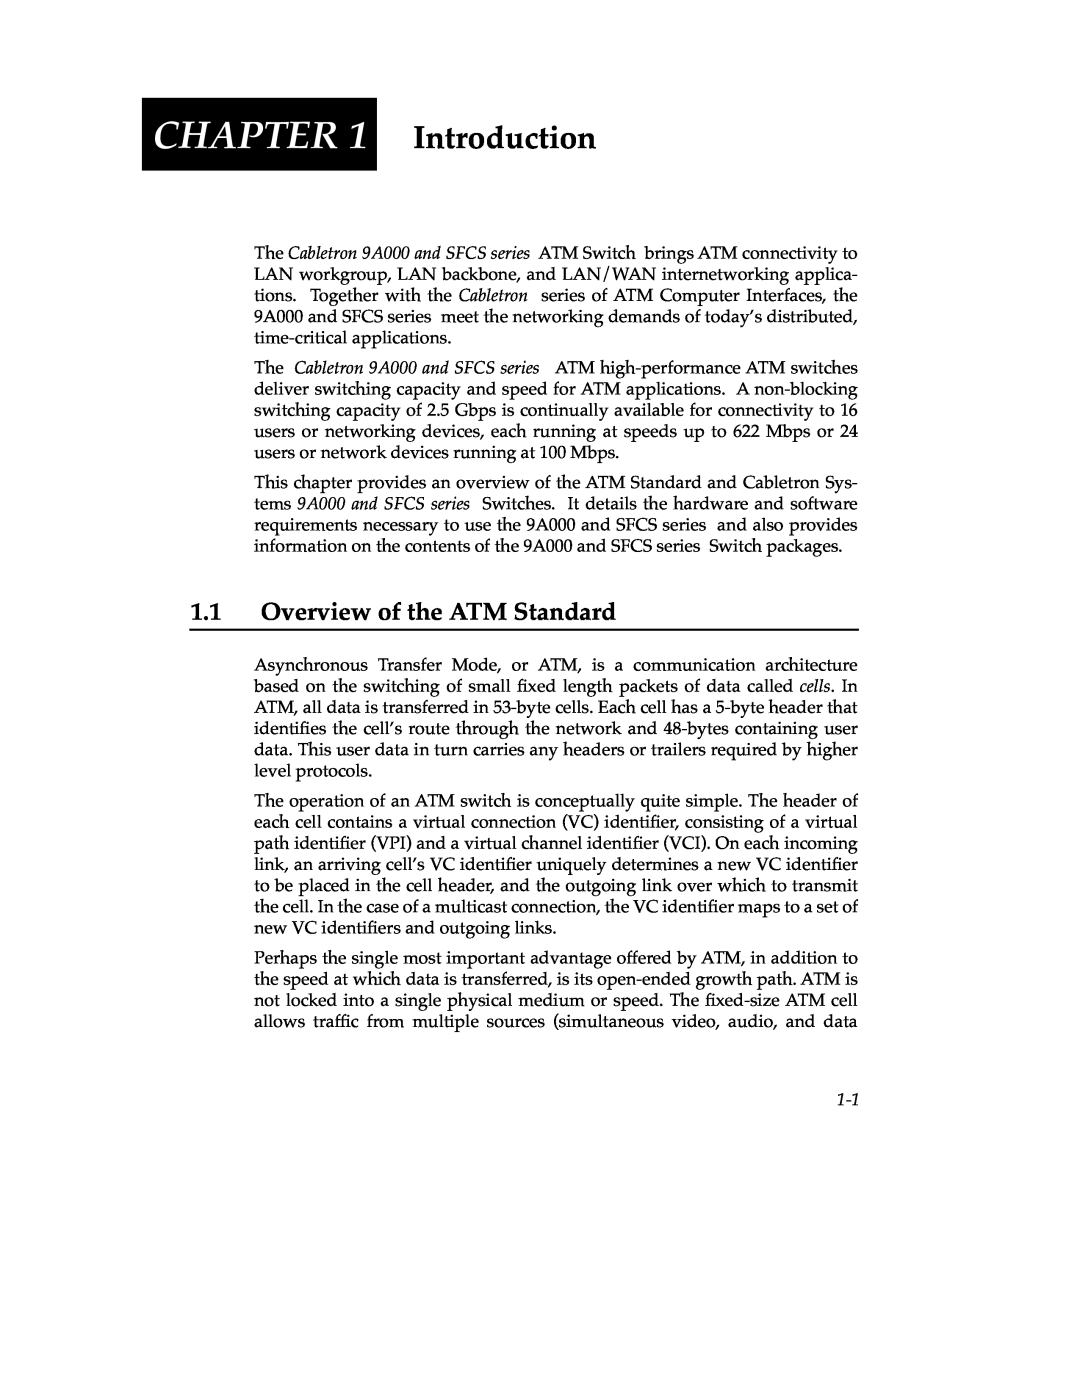 Cabletron Systems 9A000 manual Chapter, Introduction, Overview of the ATM Standard 